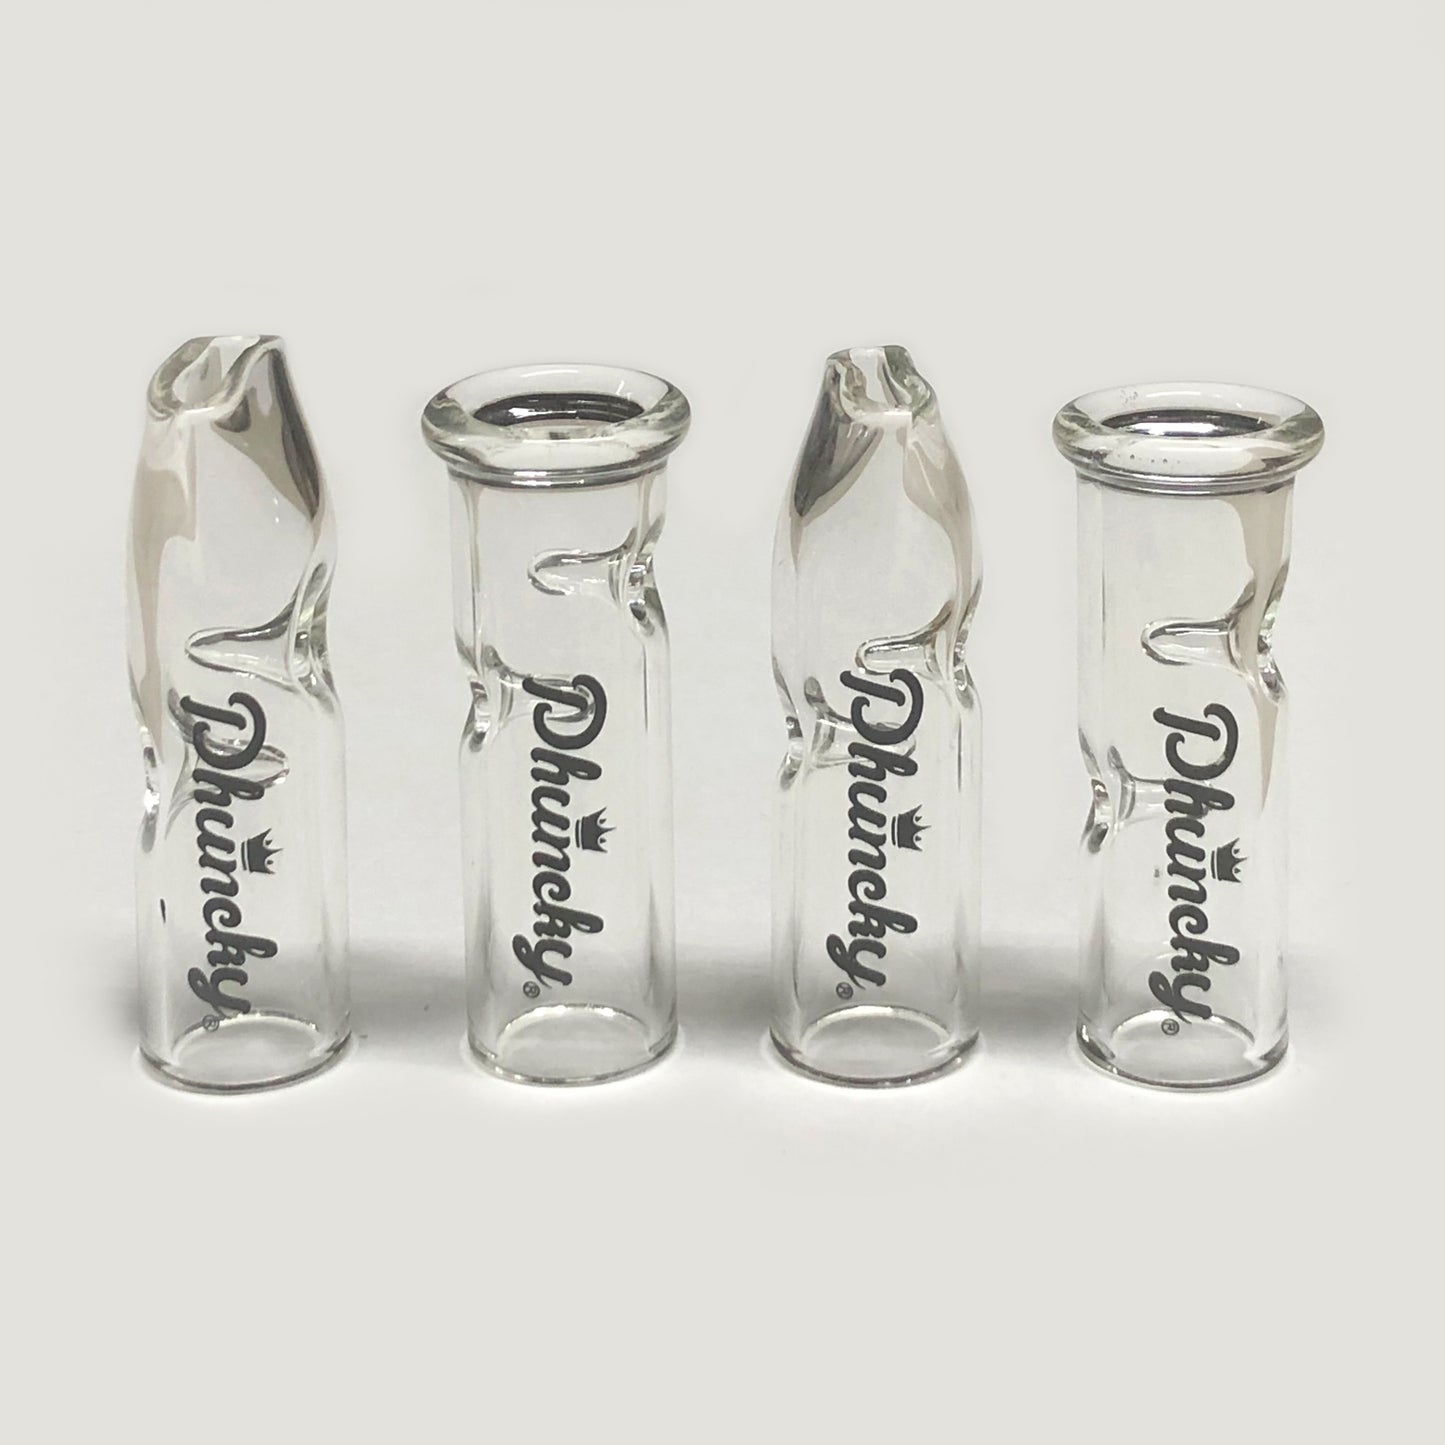 16mm Phuncky Phont Clear 4 Pack (Mixed)